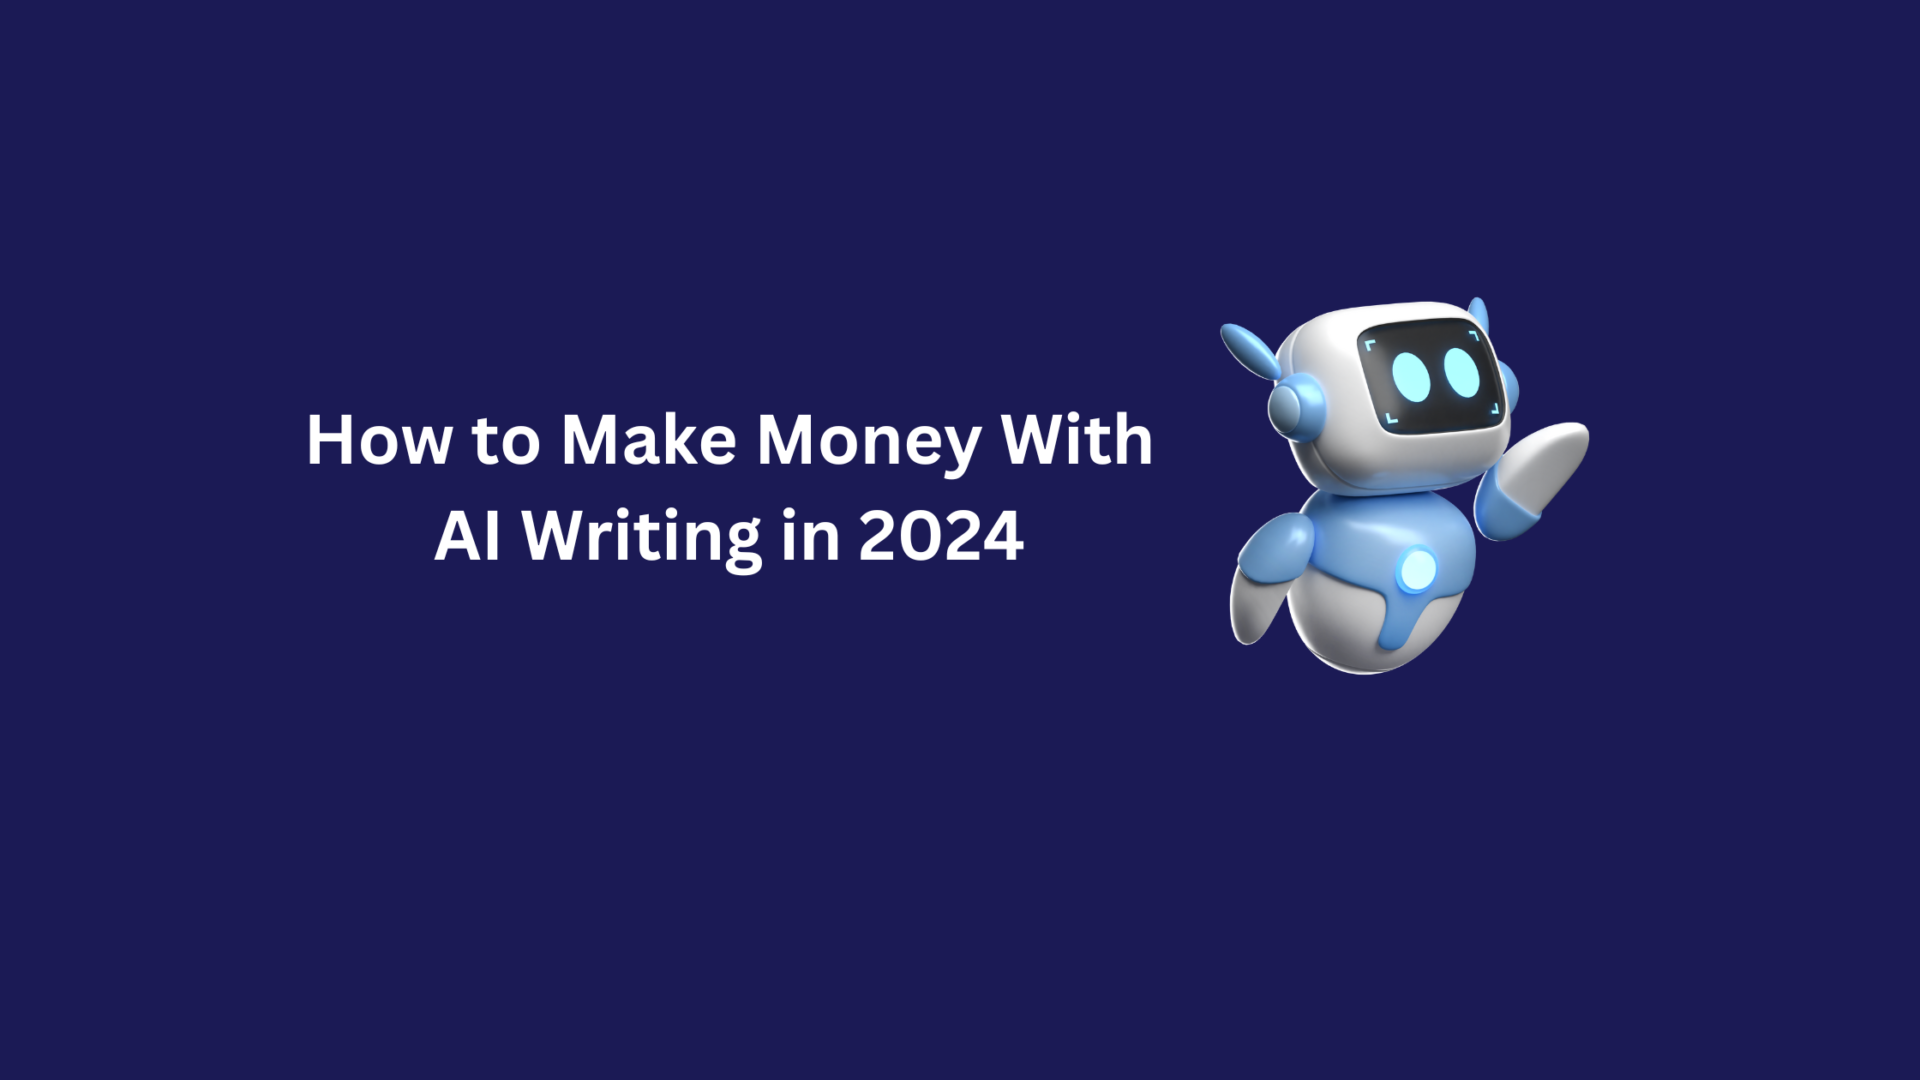 How to Make Money With AI Writing in 2024